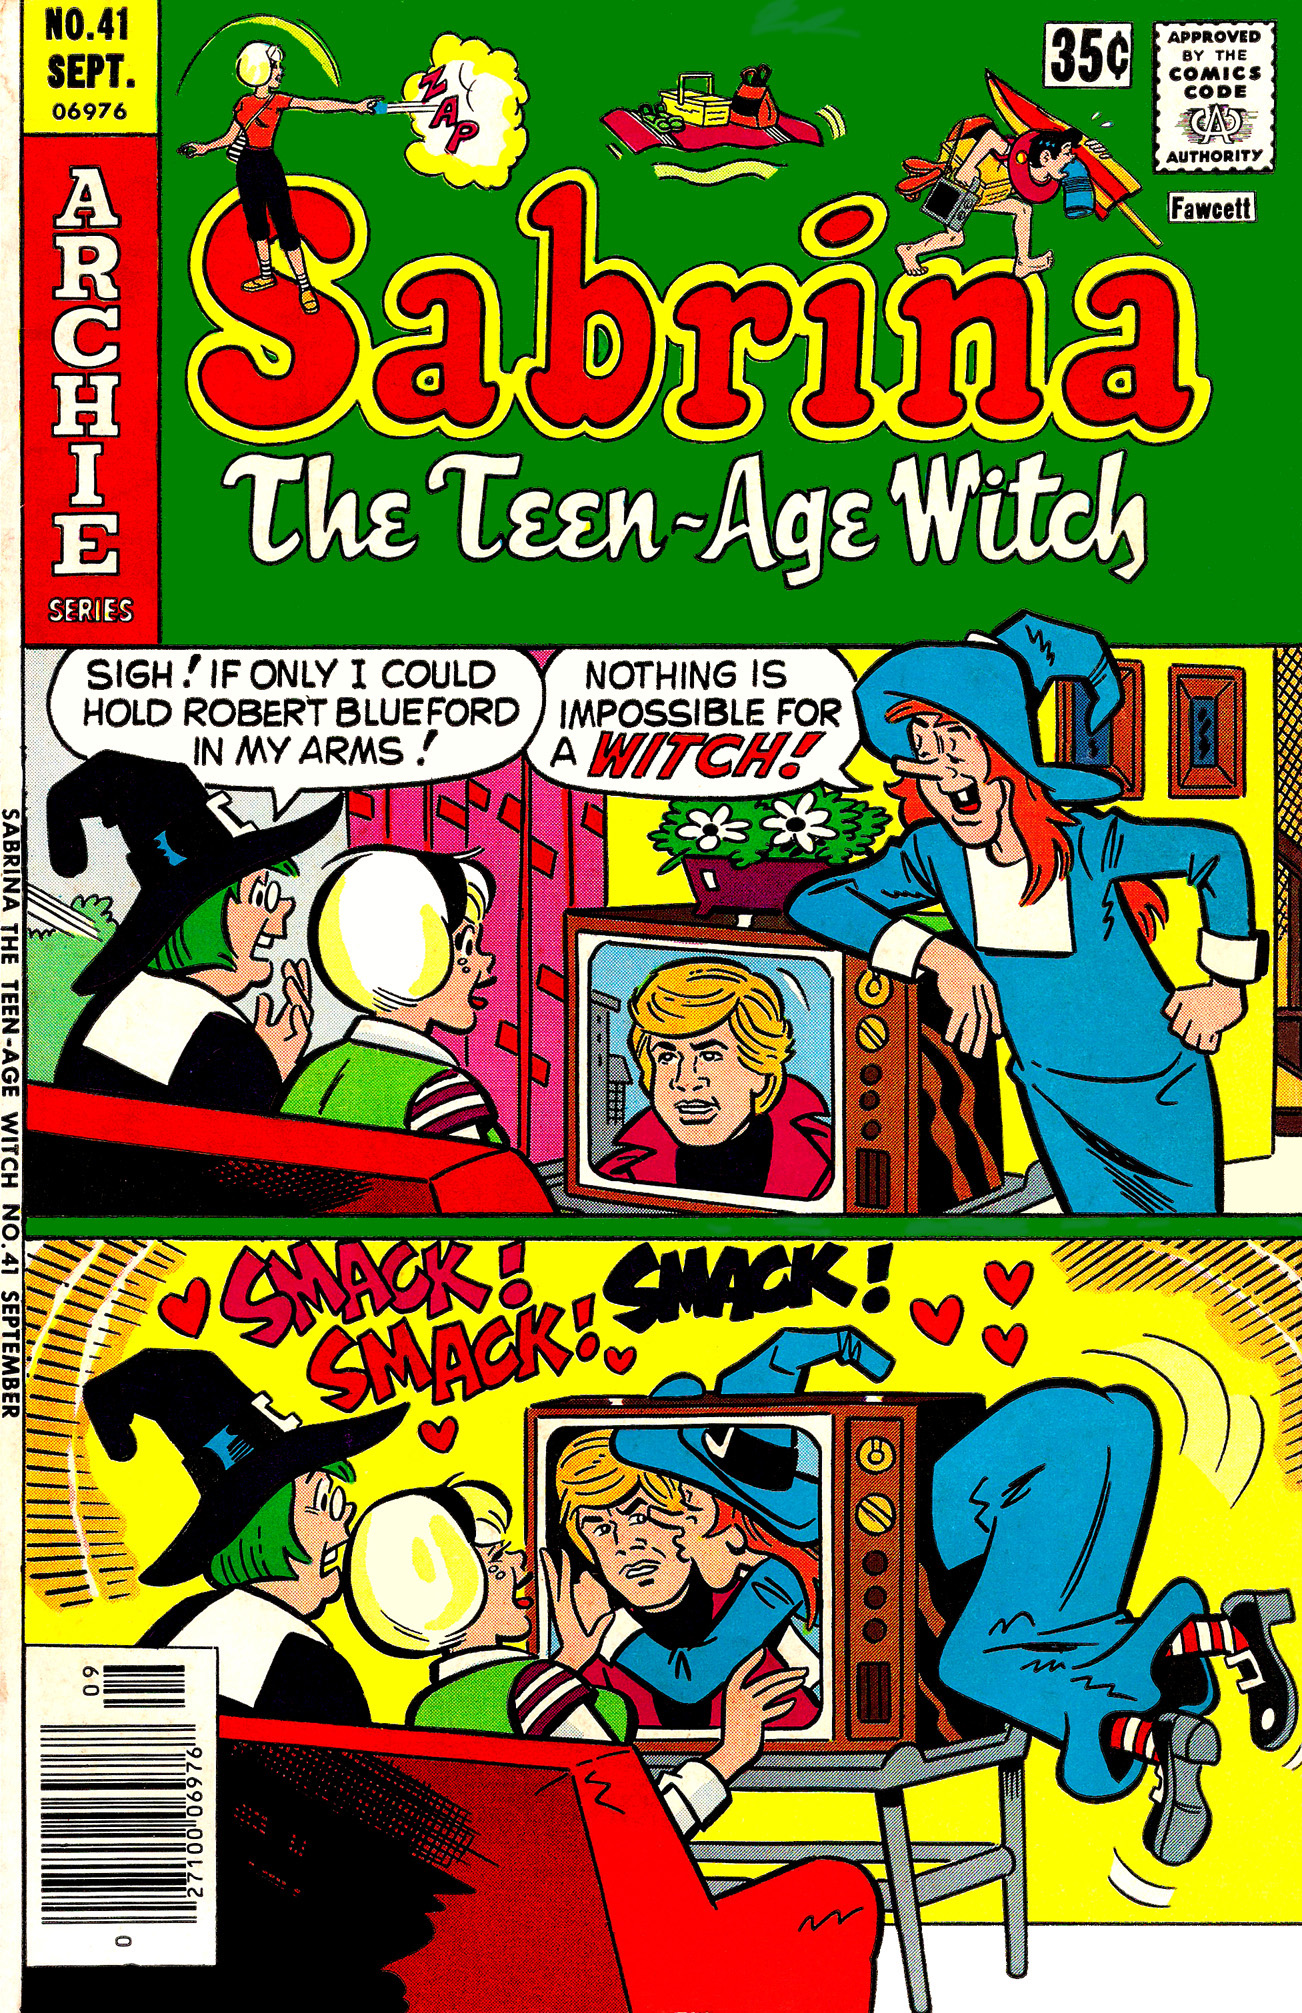 Sabrina The Teenage Witch (1971) Issue #41 #41 - English 1